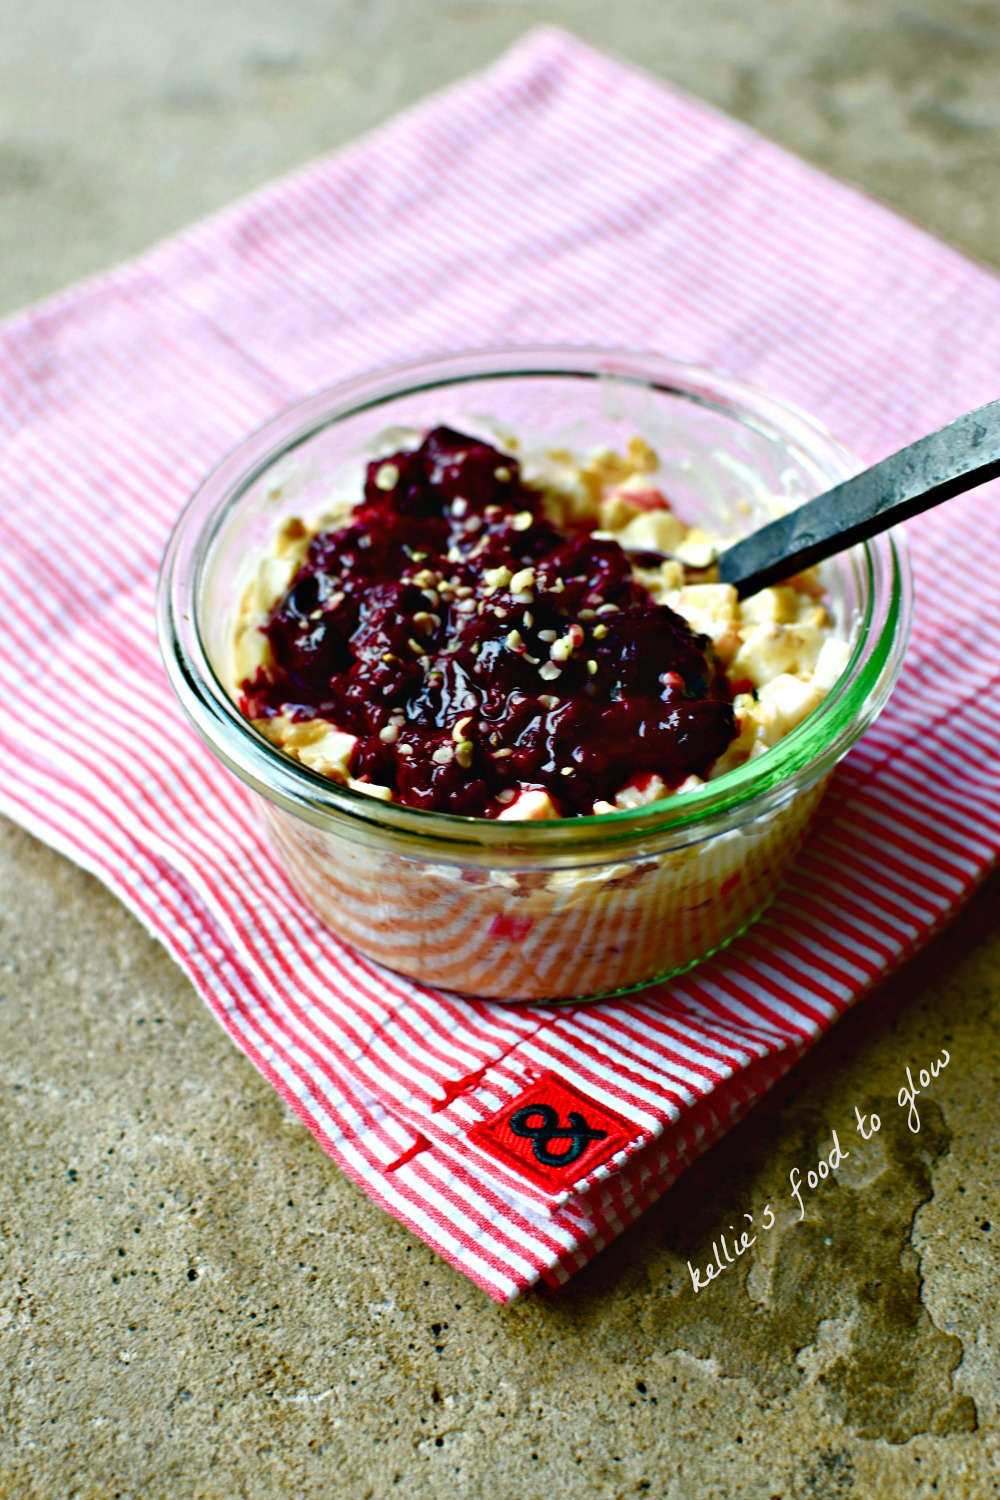 Make your homemade granola into a stunning autumn Bircher-style breakfast, adding homemade berry compote for extra colour, nutrients and tangy flavour. You will have enough berry compote for several bowls of soaked granola, or to swirl into yogurt.